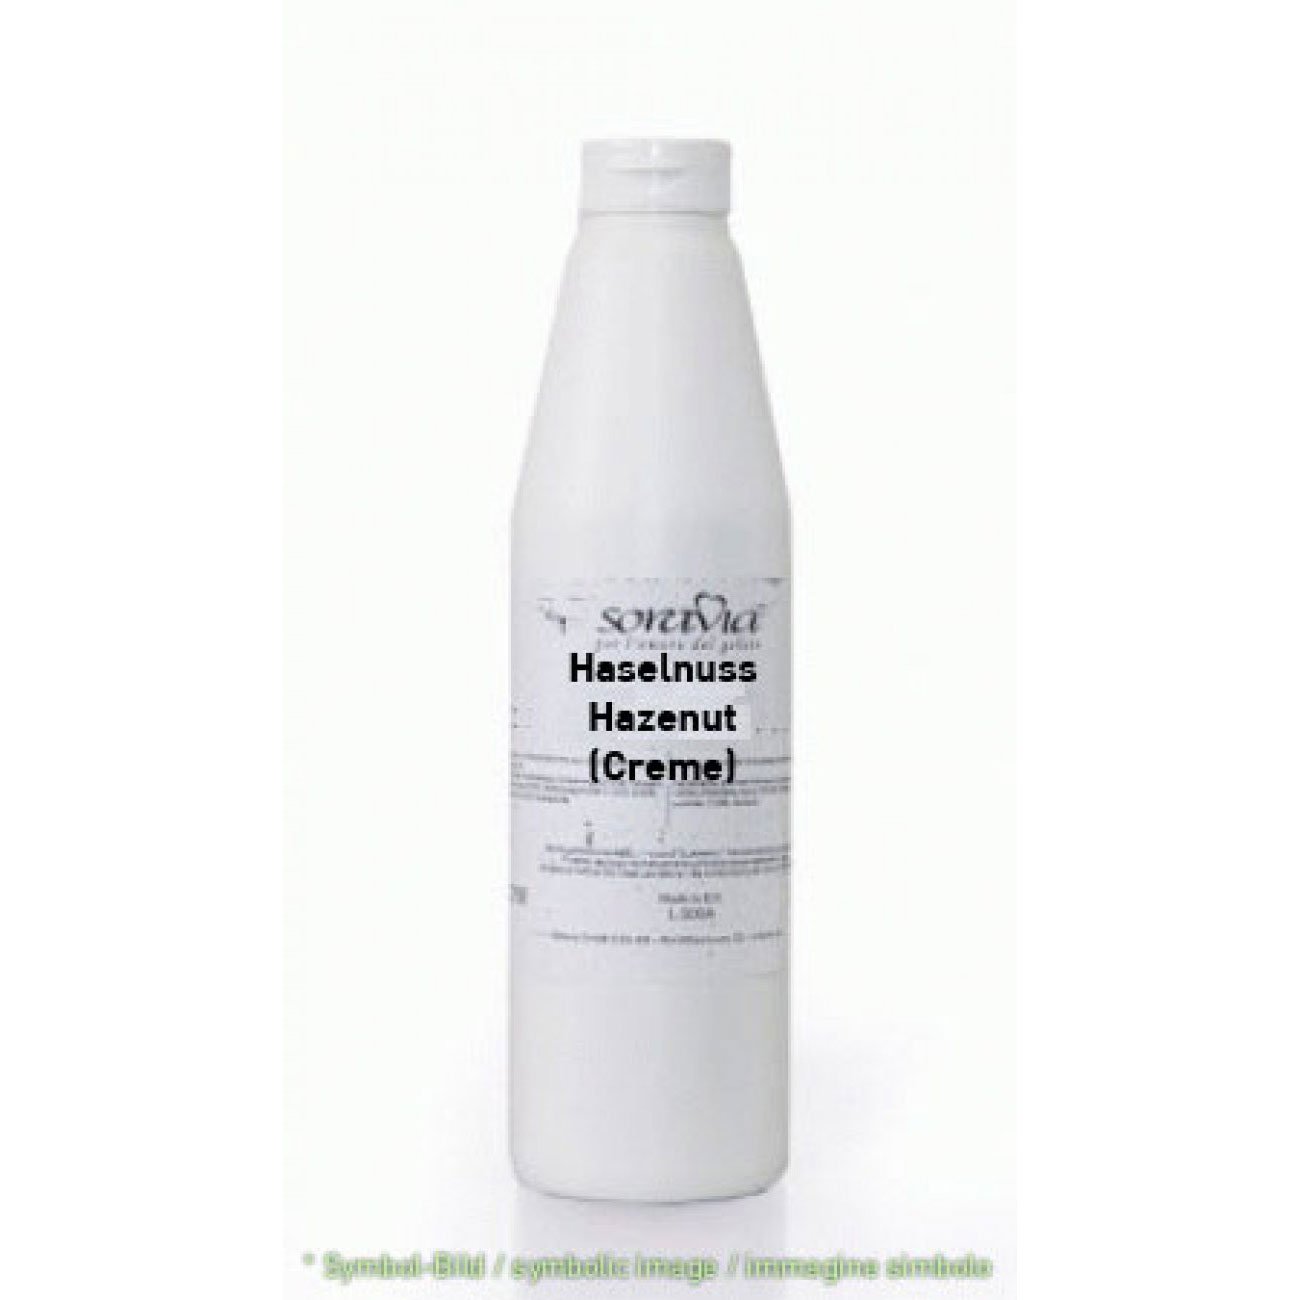 Haselnuss Creme Topping - Flasche 1,00 kg